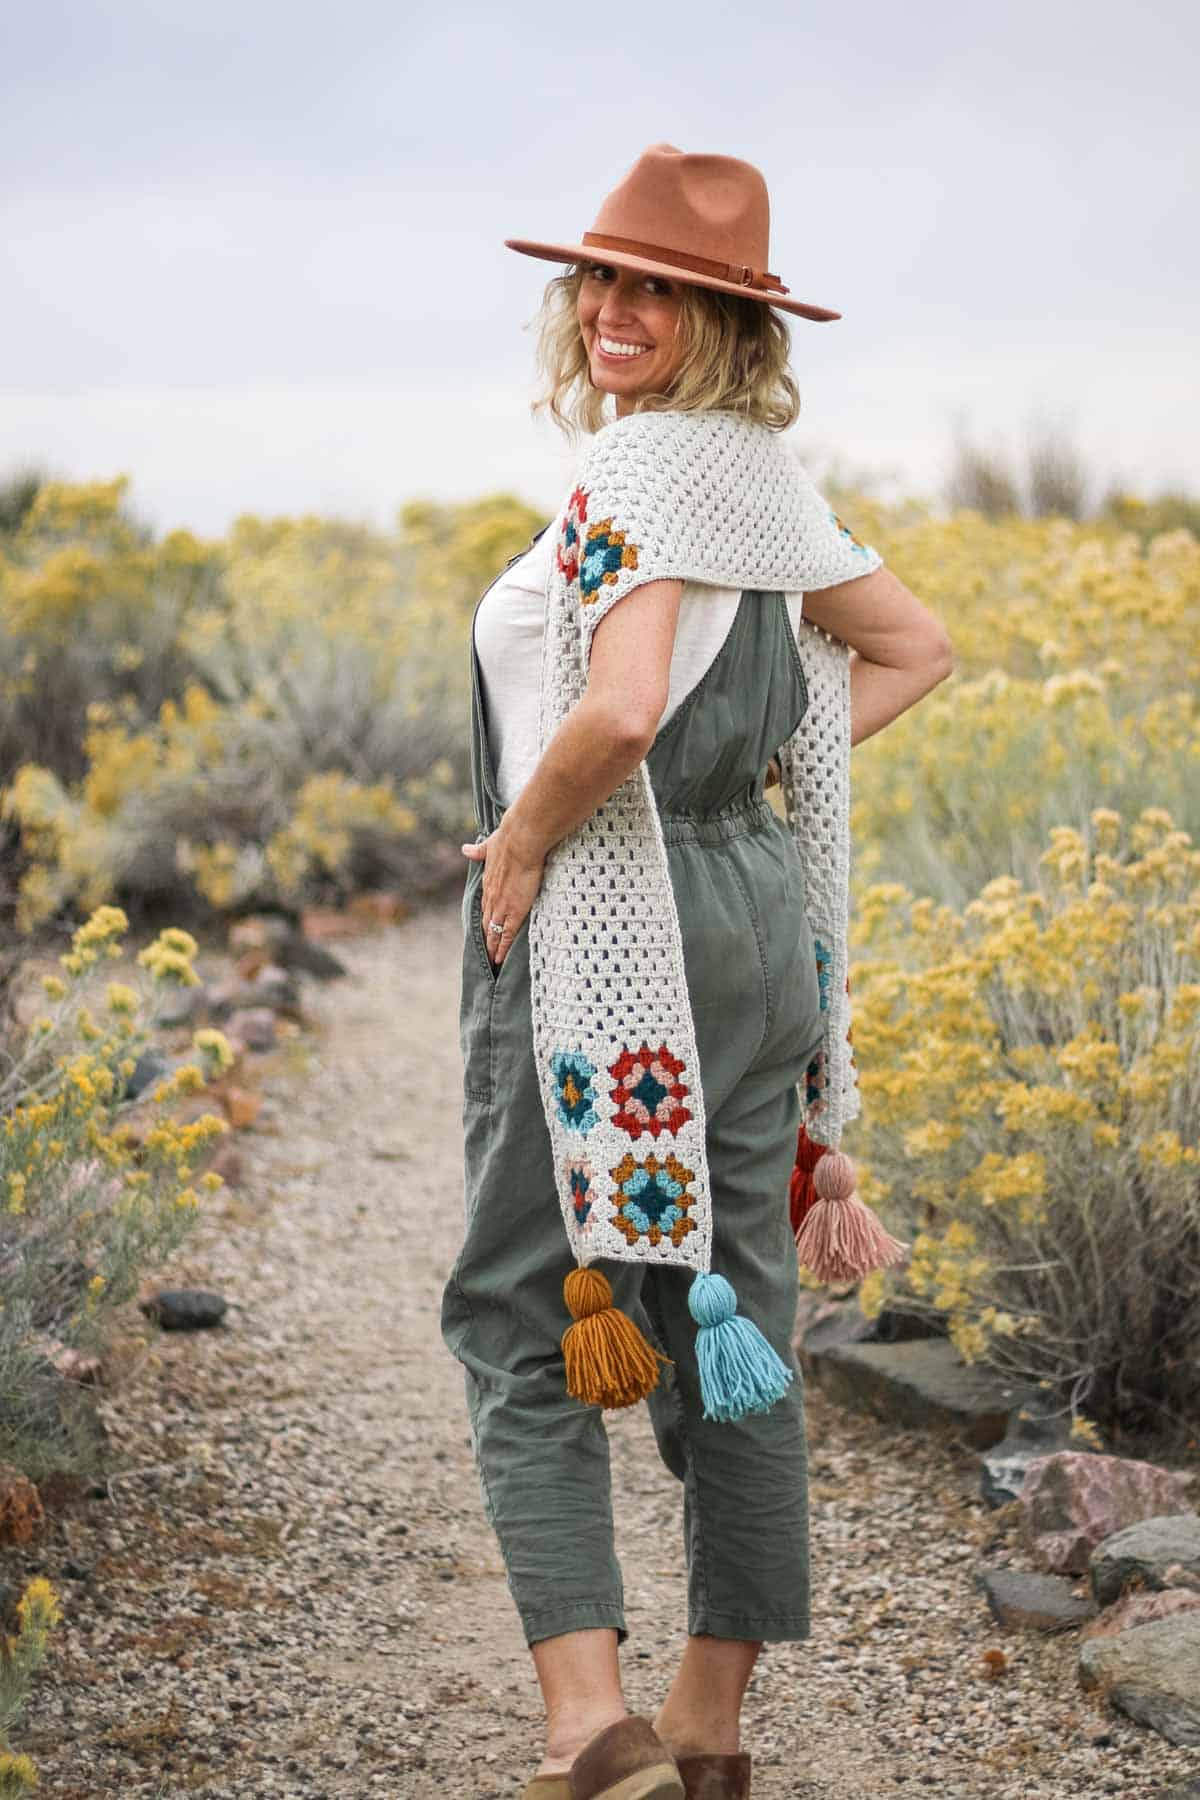 Crochet granny square scarf with tassels being modeled by a woman outdoors.